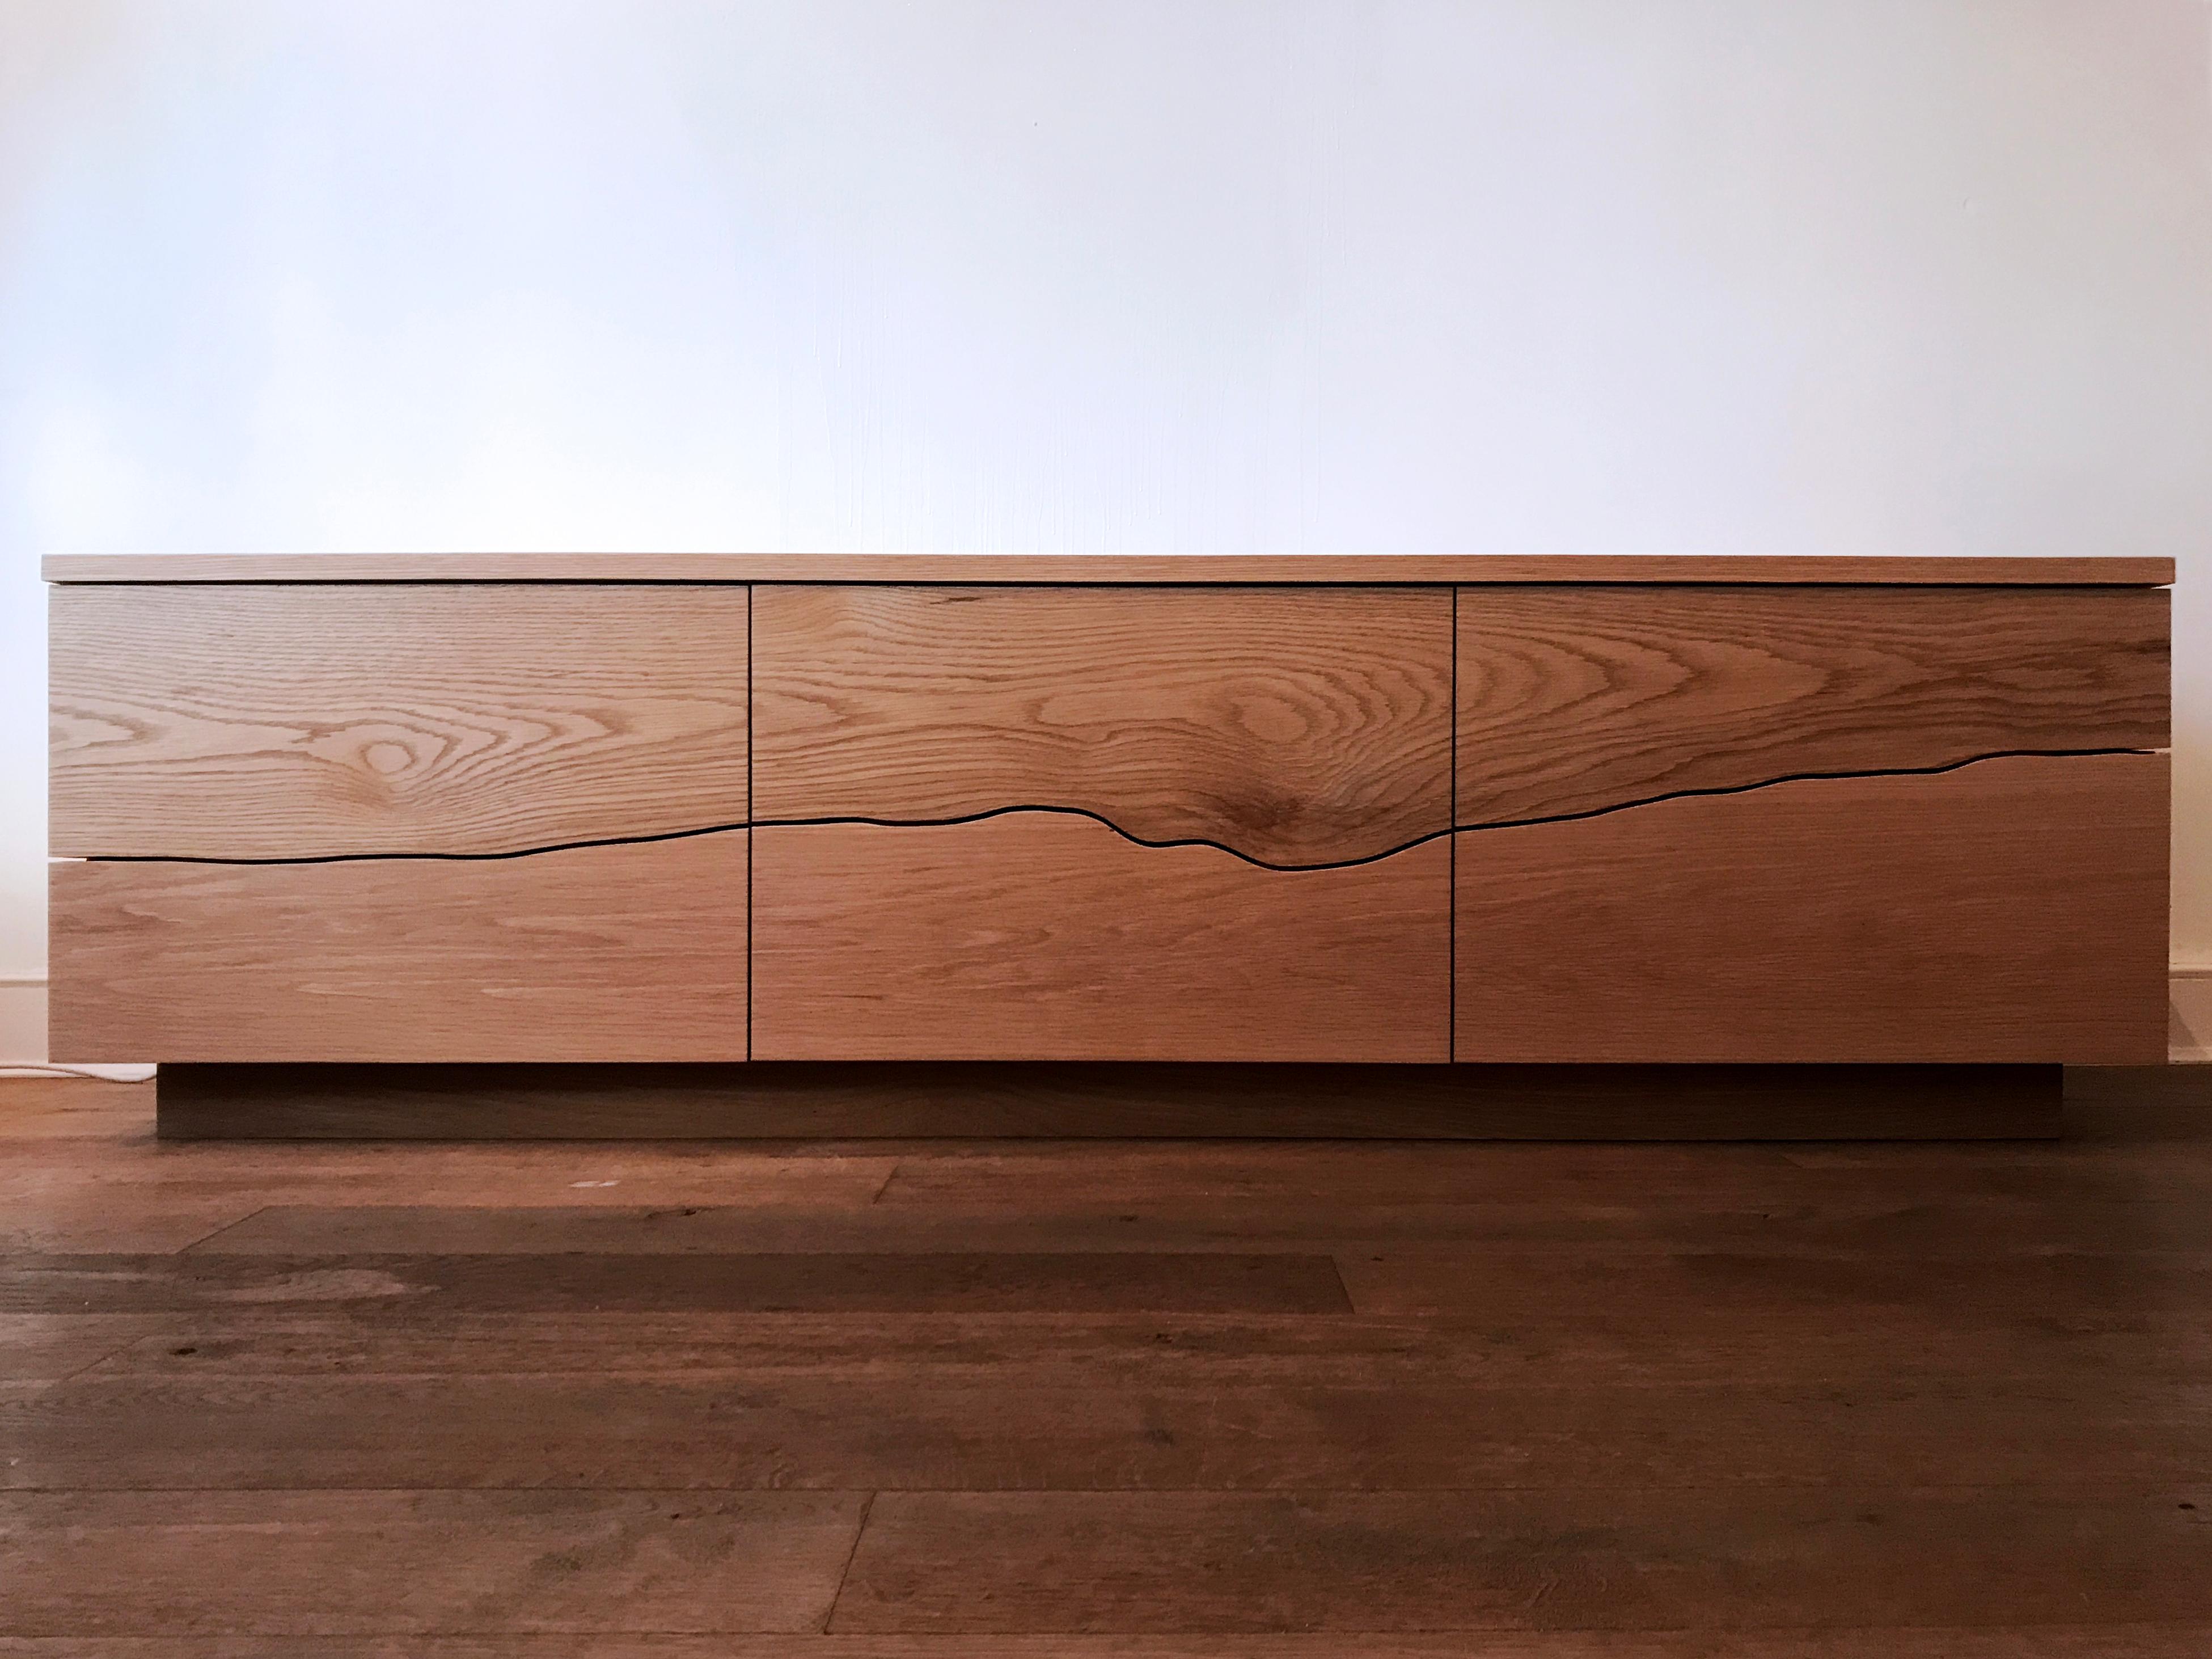 Ingrained sideboard by Adam Blencowe
Materials: Oak
Dimensions: 180 x 50 x 55 cm

We use the Ingrained design across three pieces of furniture, wardrobes, dressers and sideboards. There made to our clients size and finish